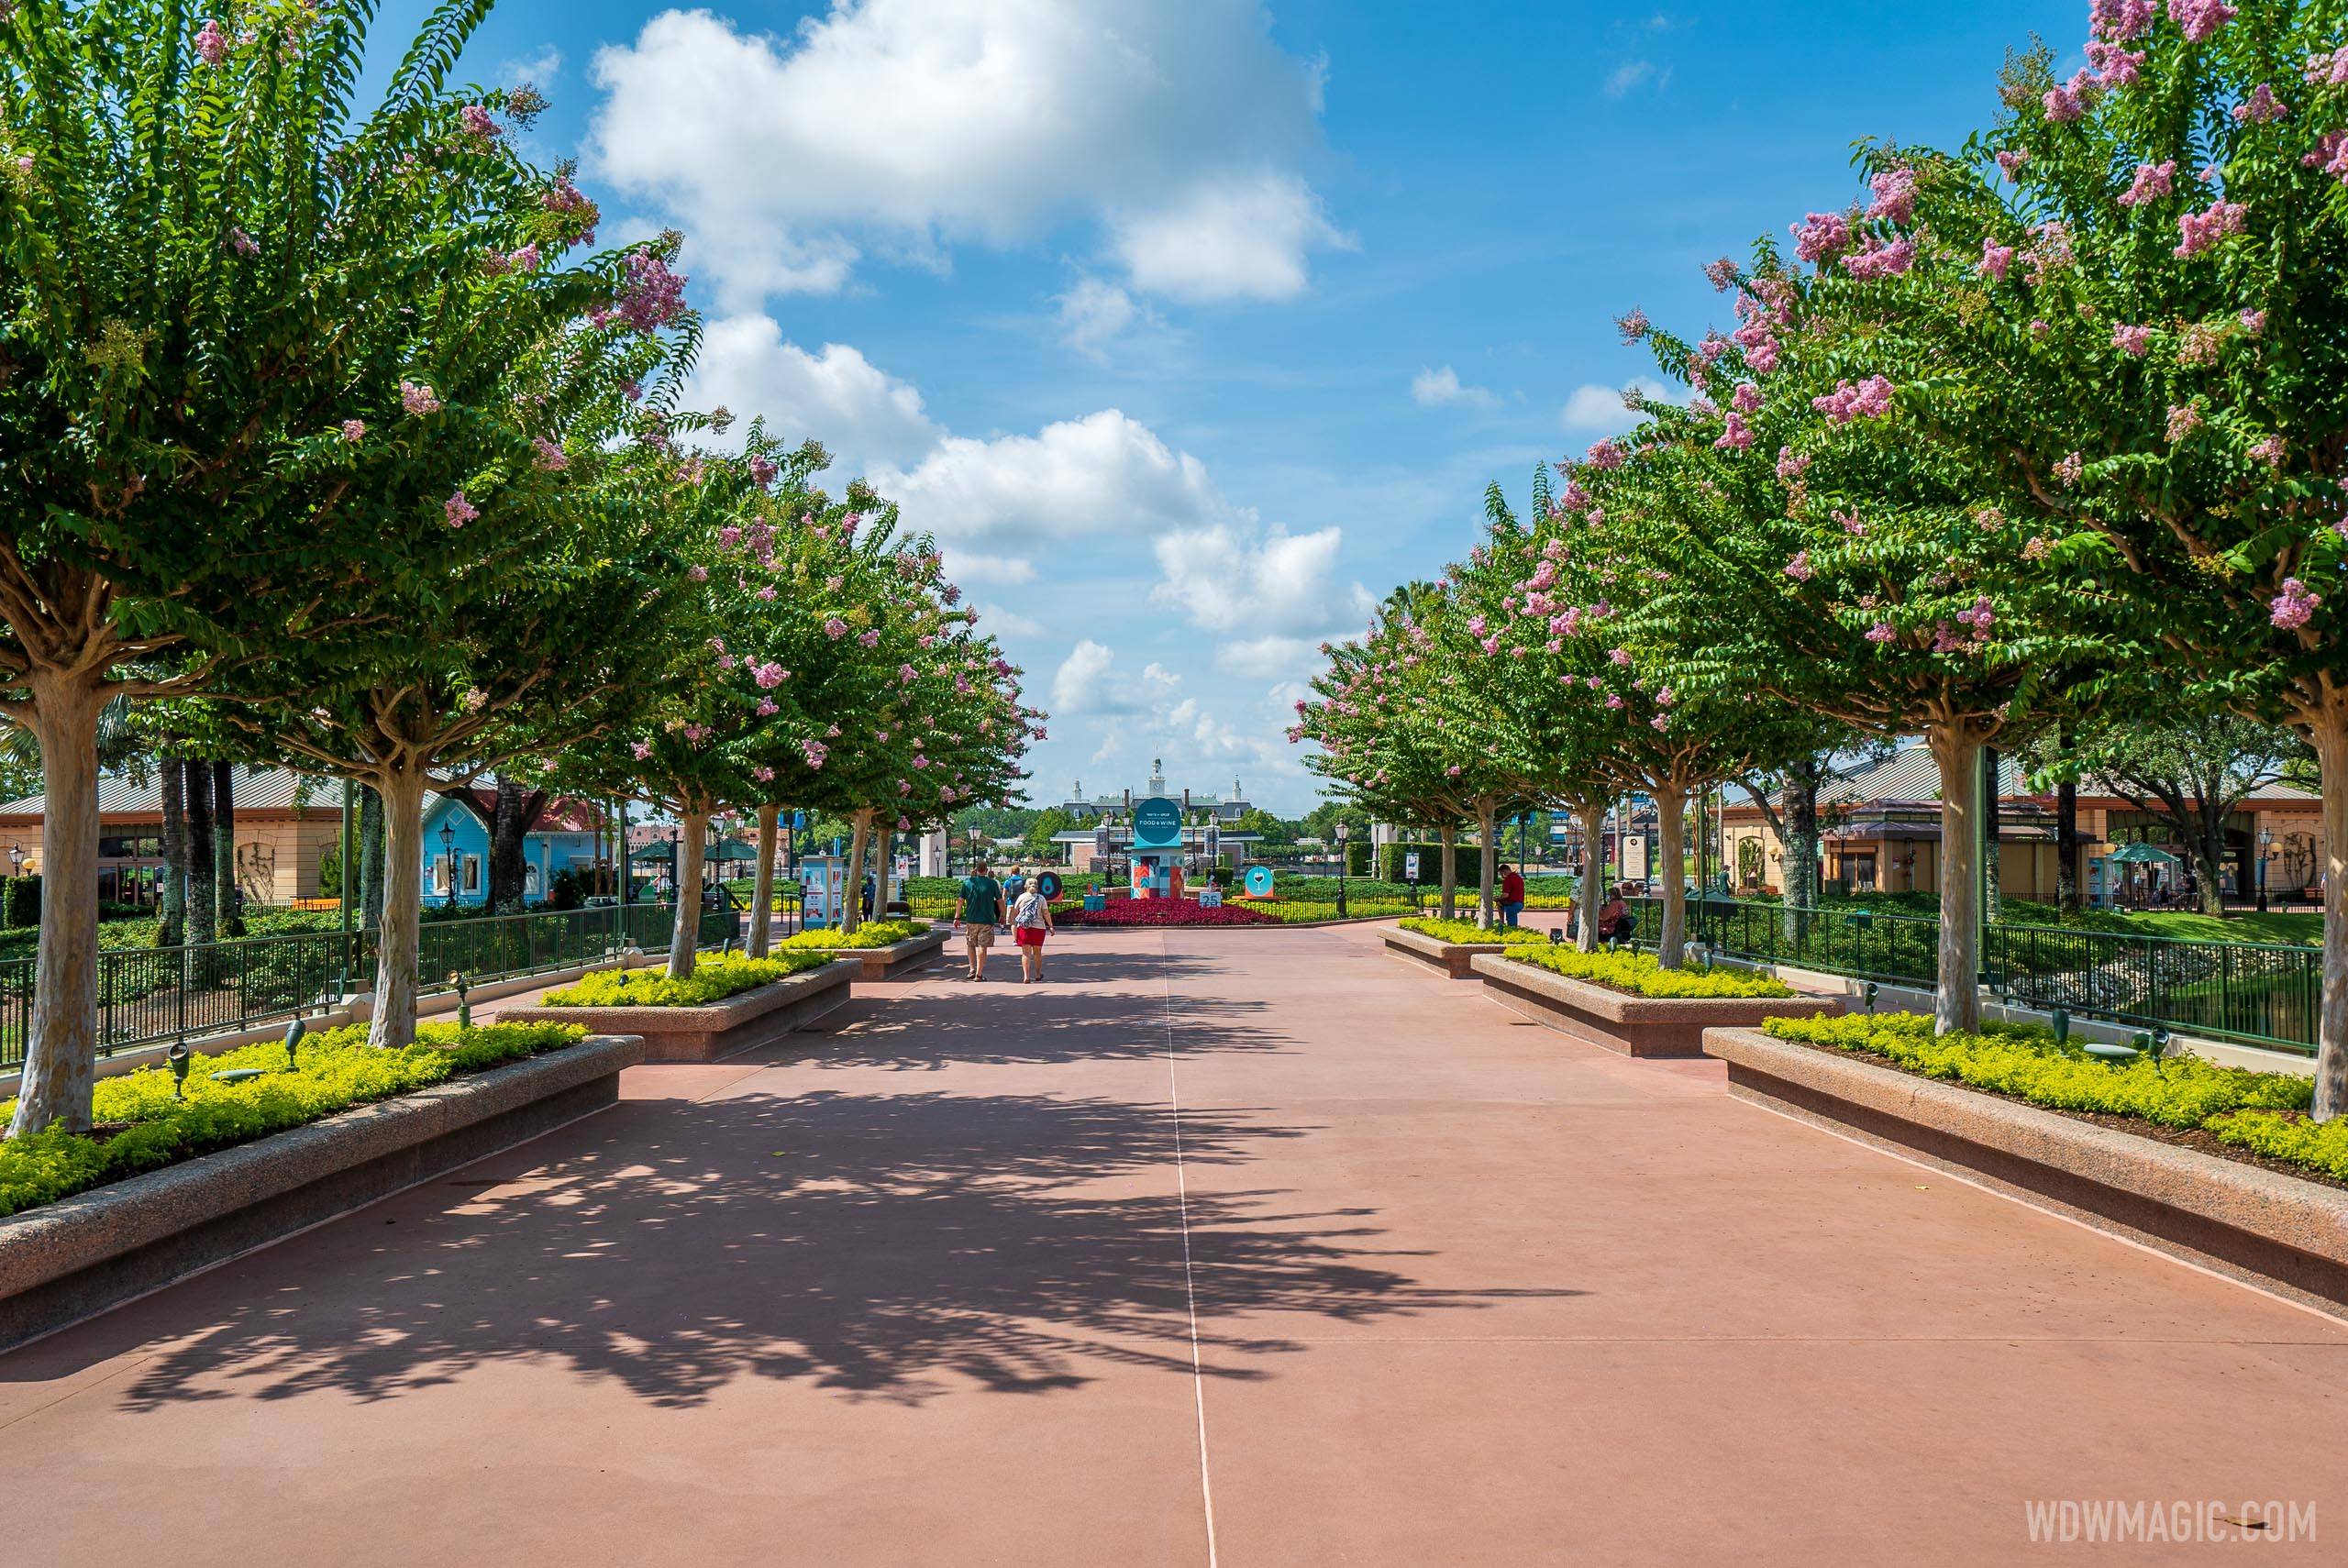 Taste of EPCOT Food and Wine Festival - Walkway to World Showcase